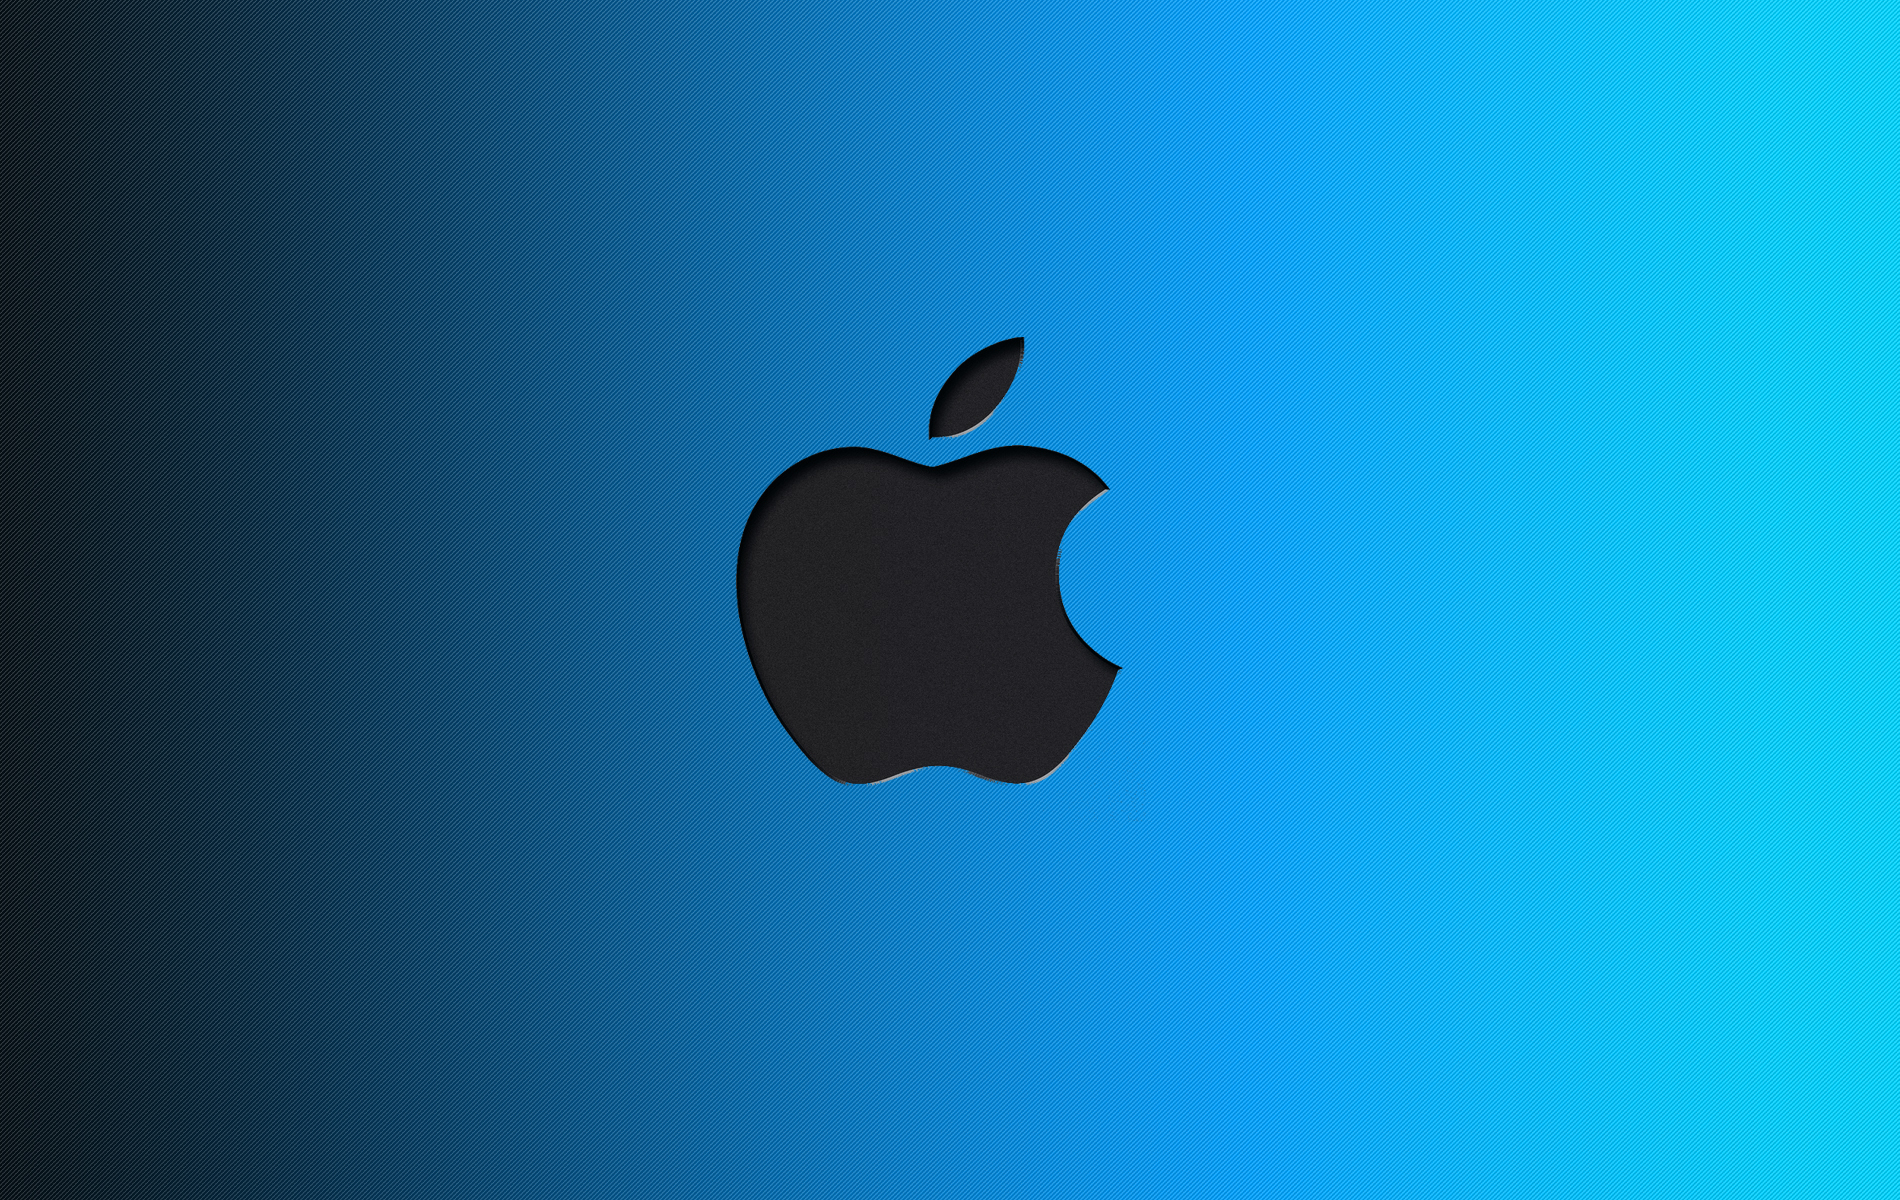 Blue Apple Backgrounds | Wallpapers, Backgrounds, Images, Art Photos.